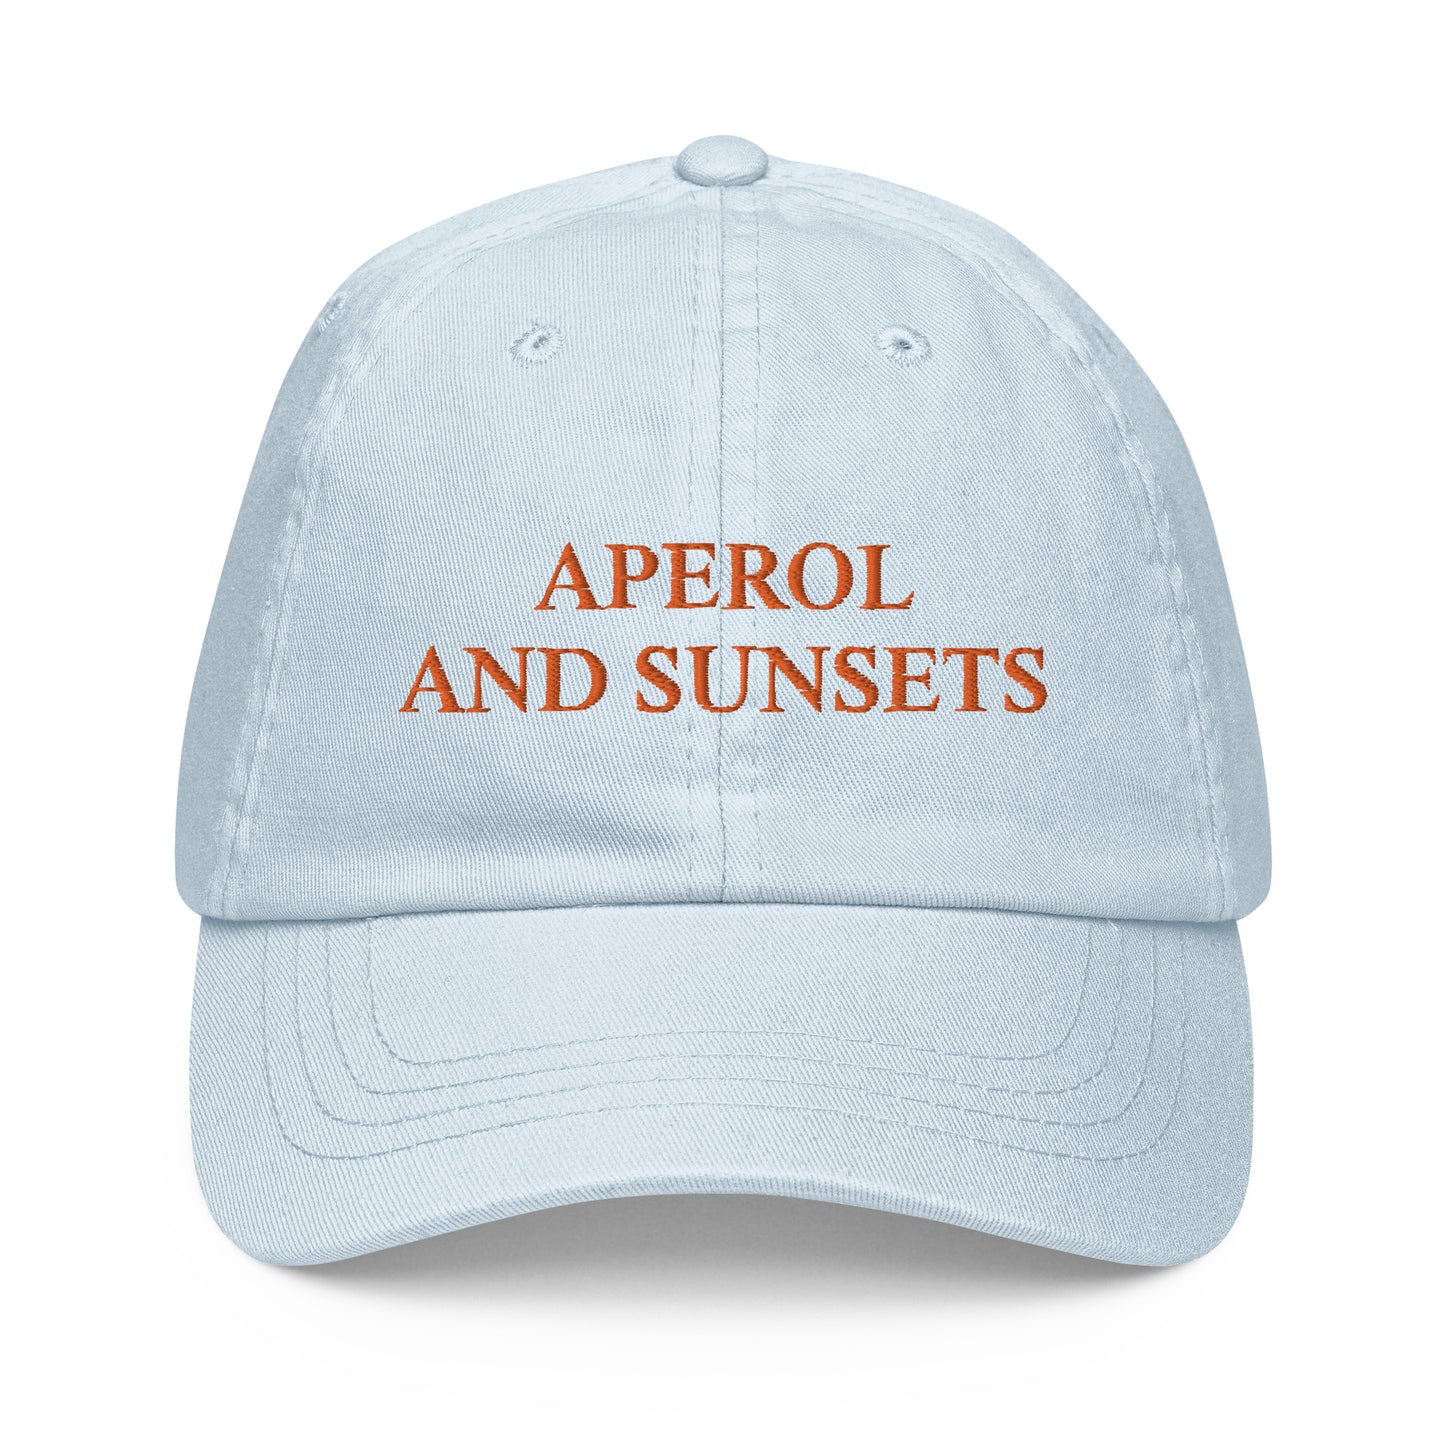 APEROL AND SUNSETS Cap